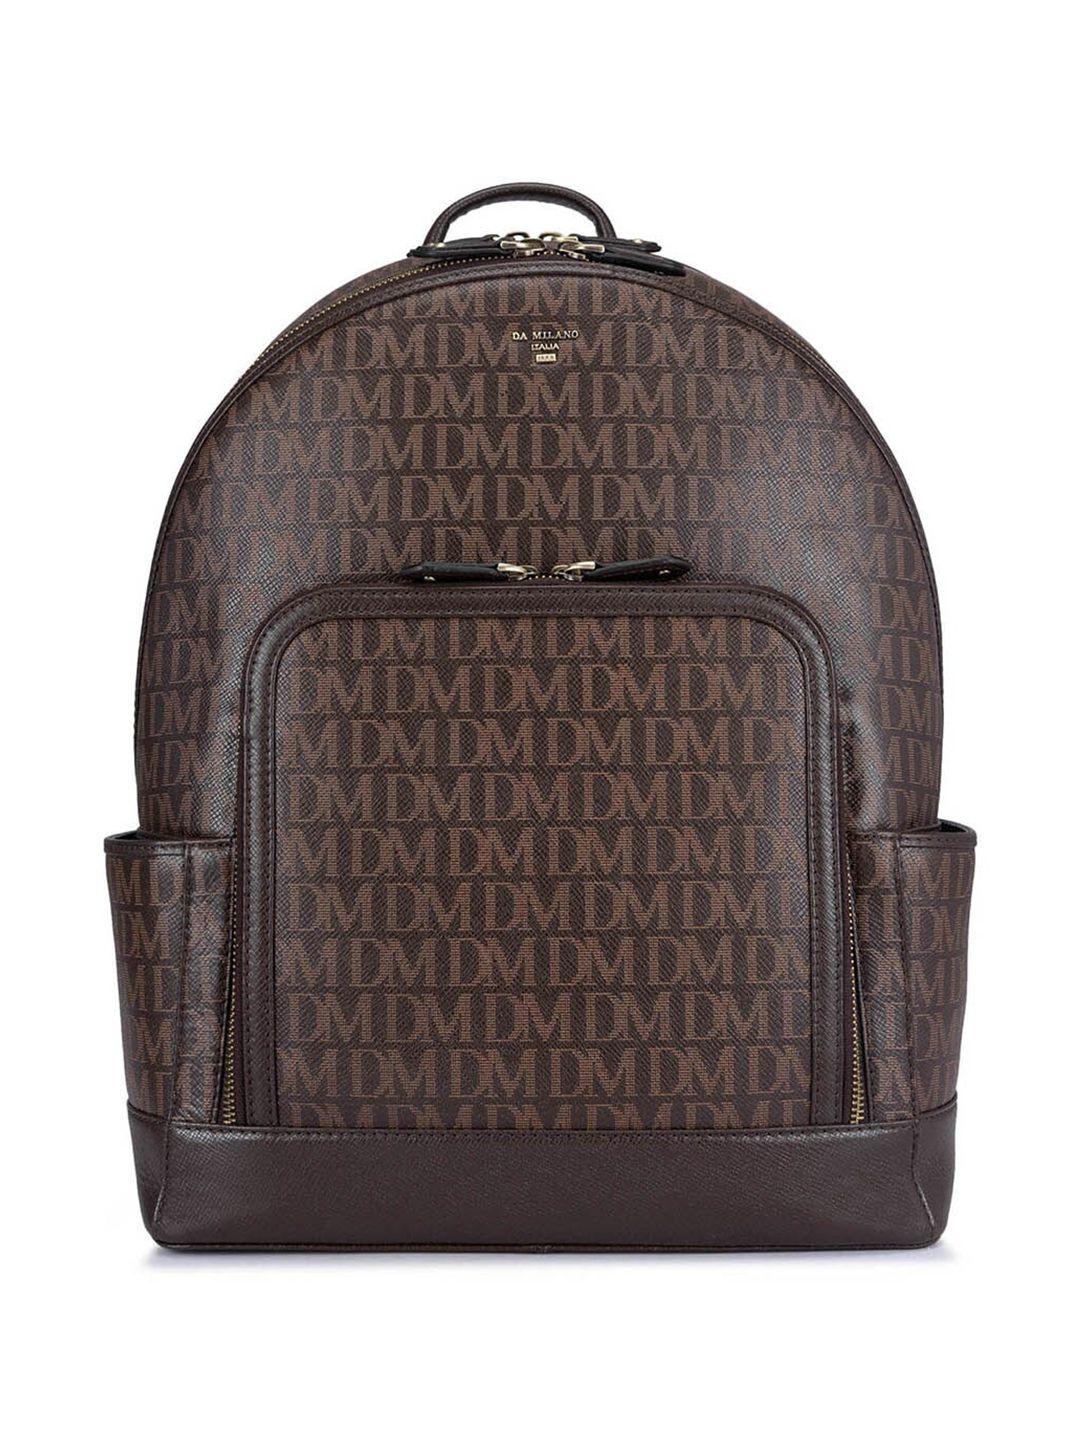 da milano women typography printed leather backpack